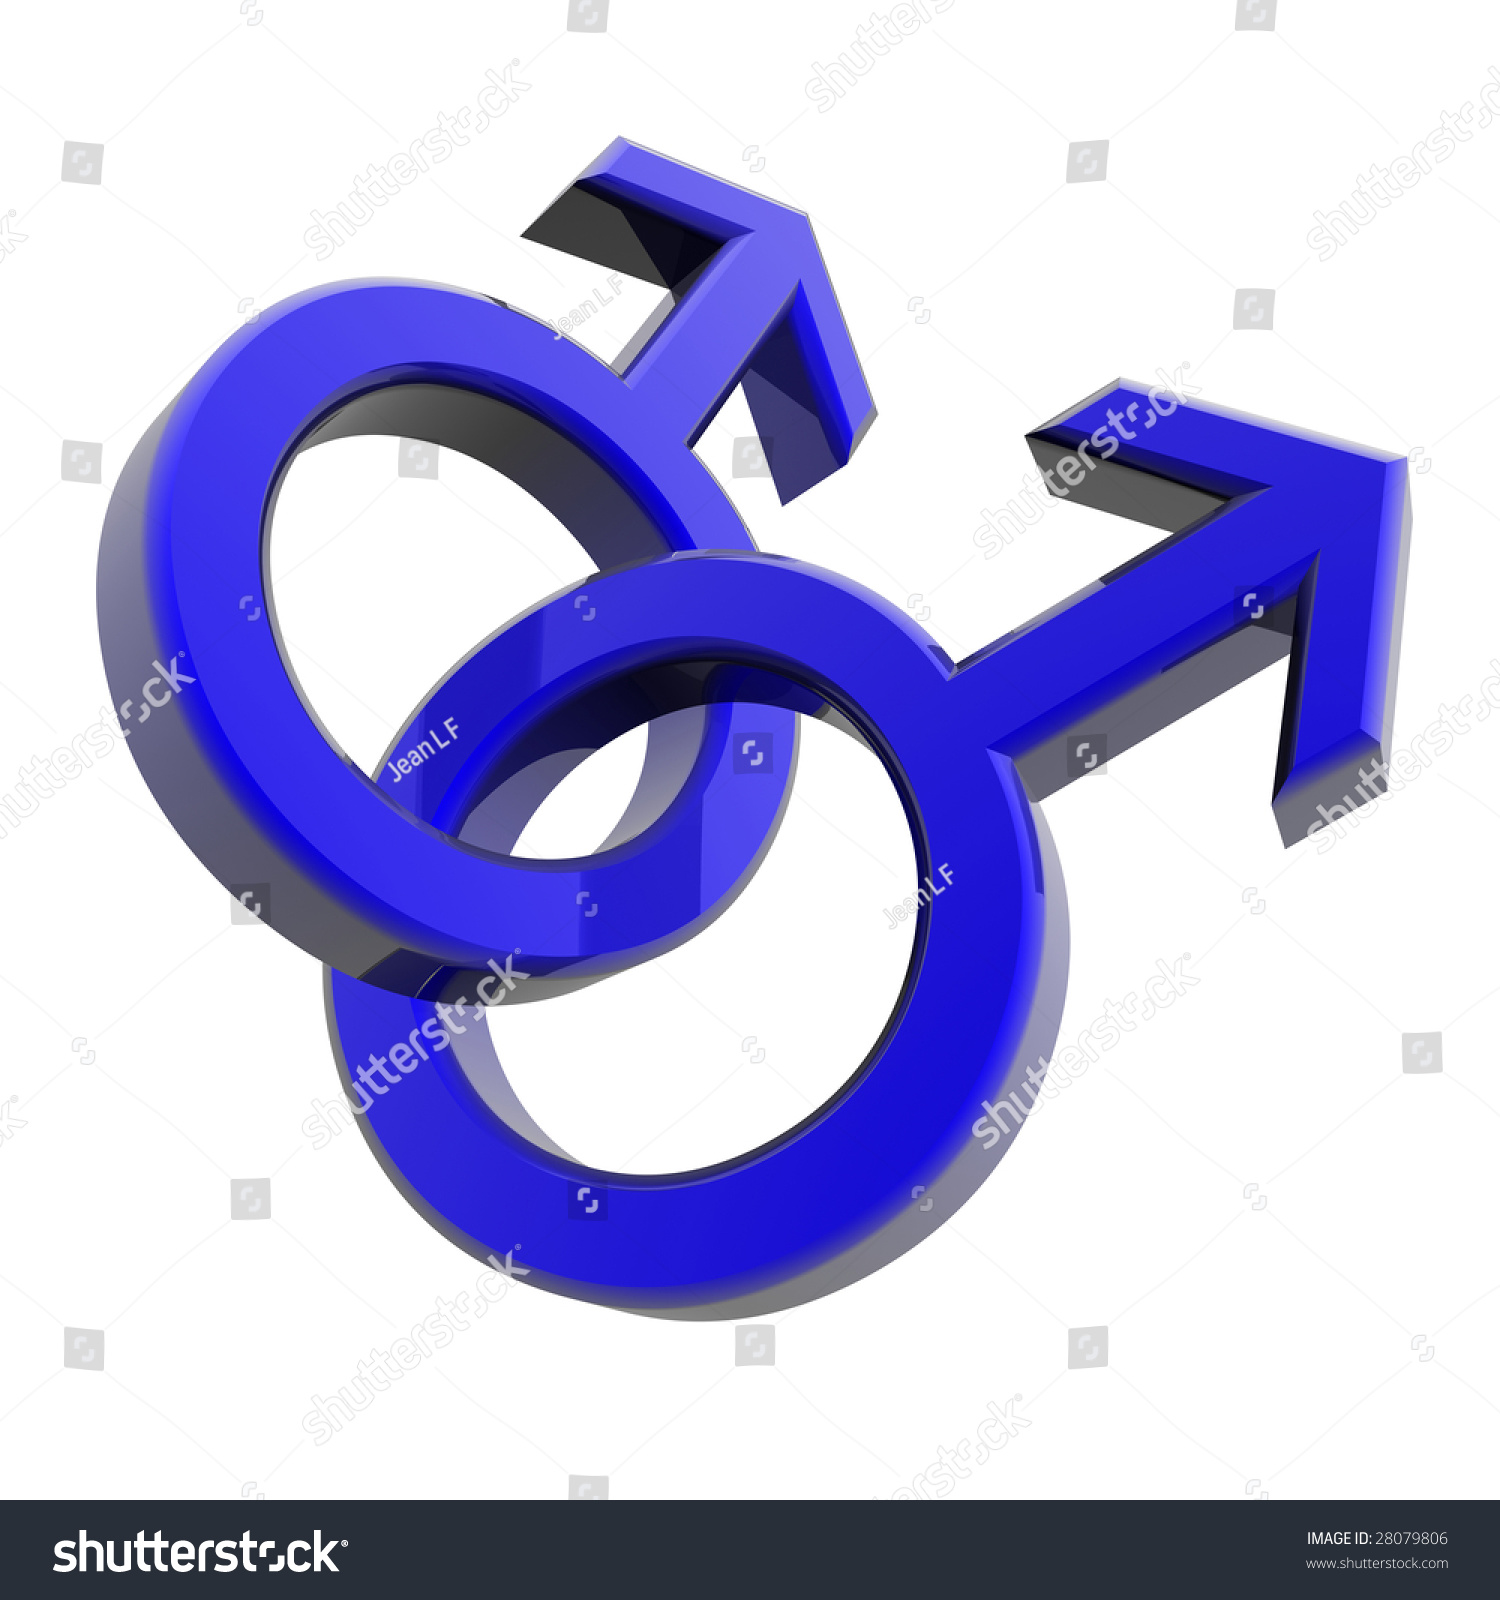 Two Male Rings Together Symbol Gay Stock Illustration 28079806